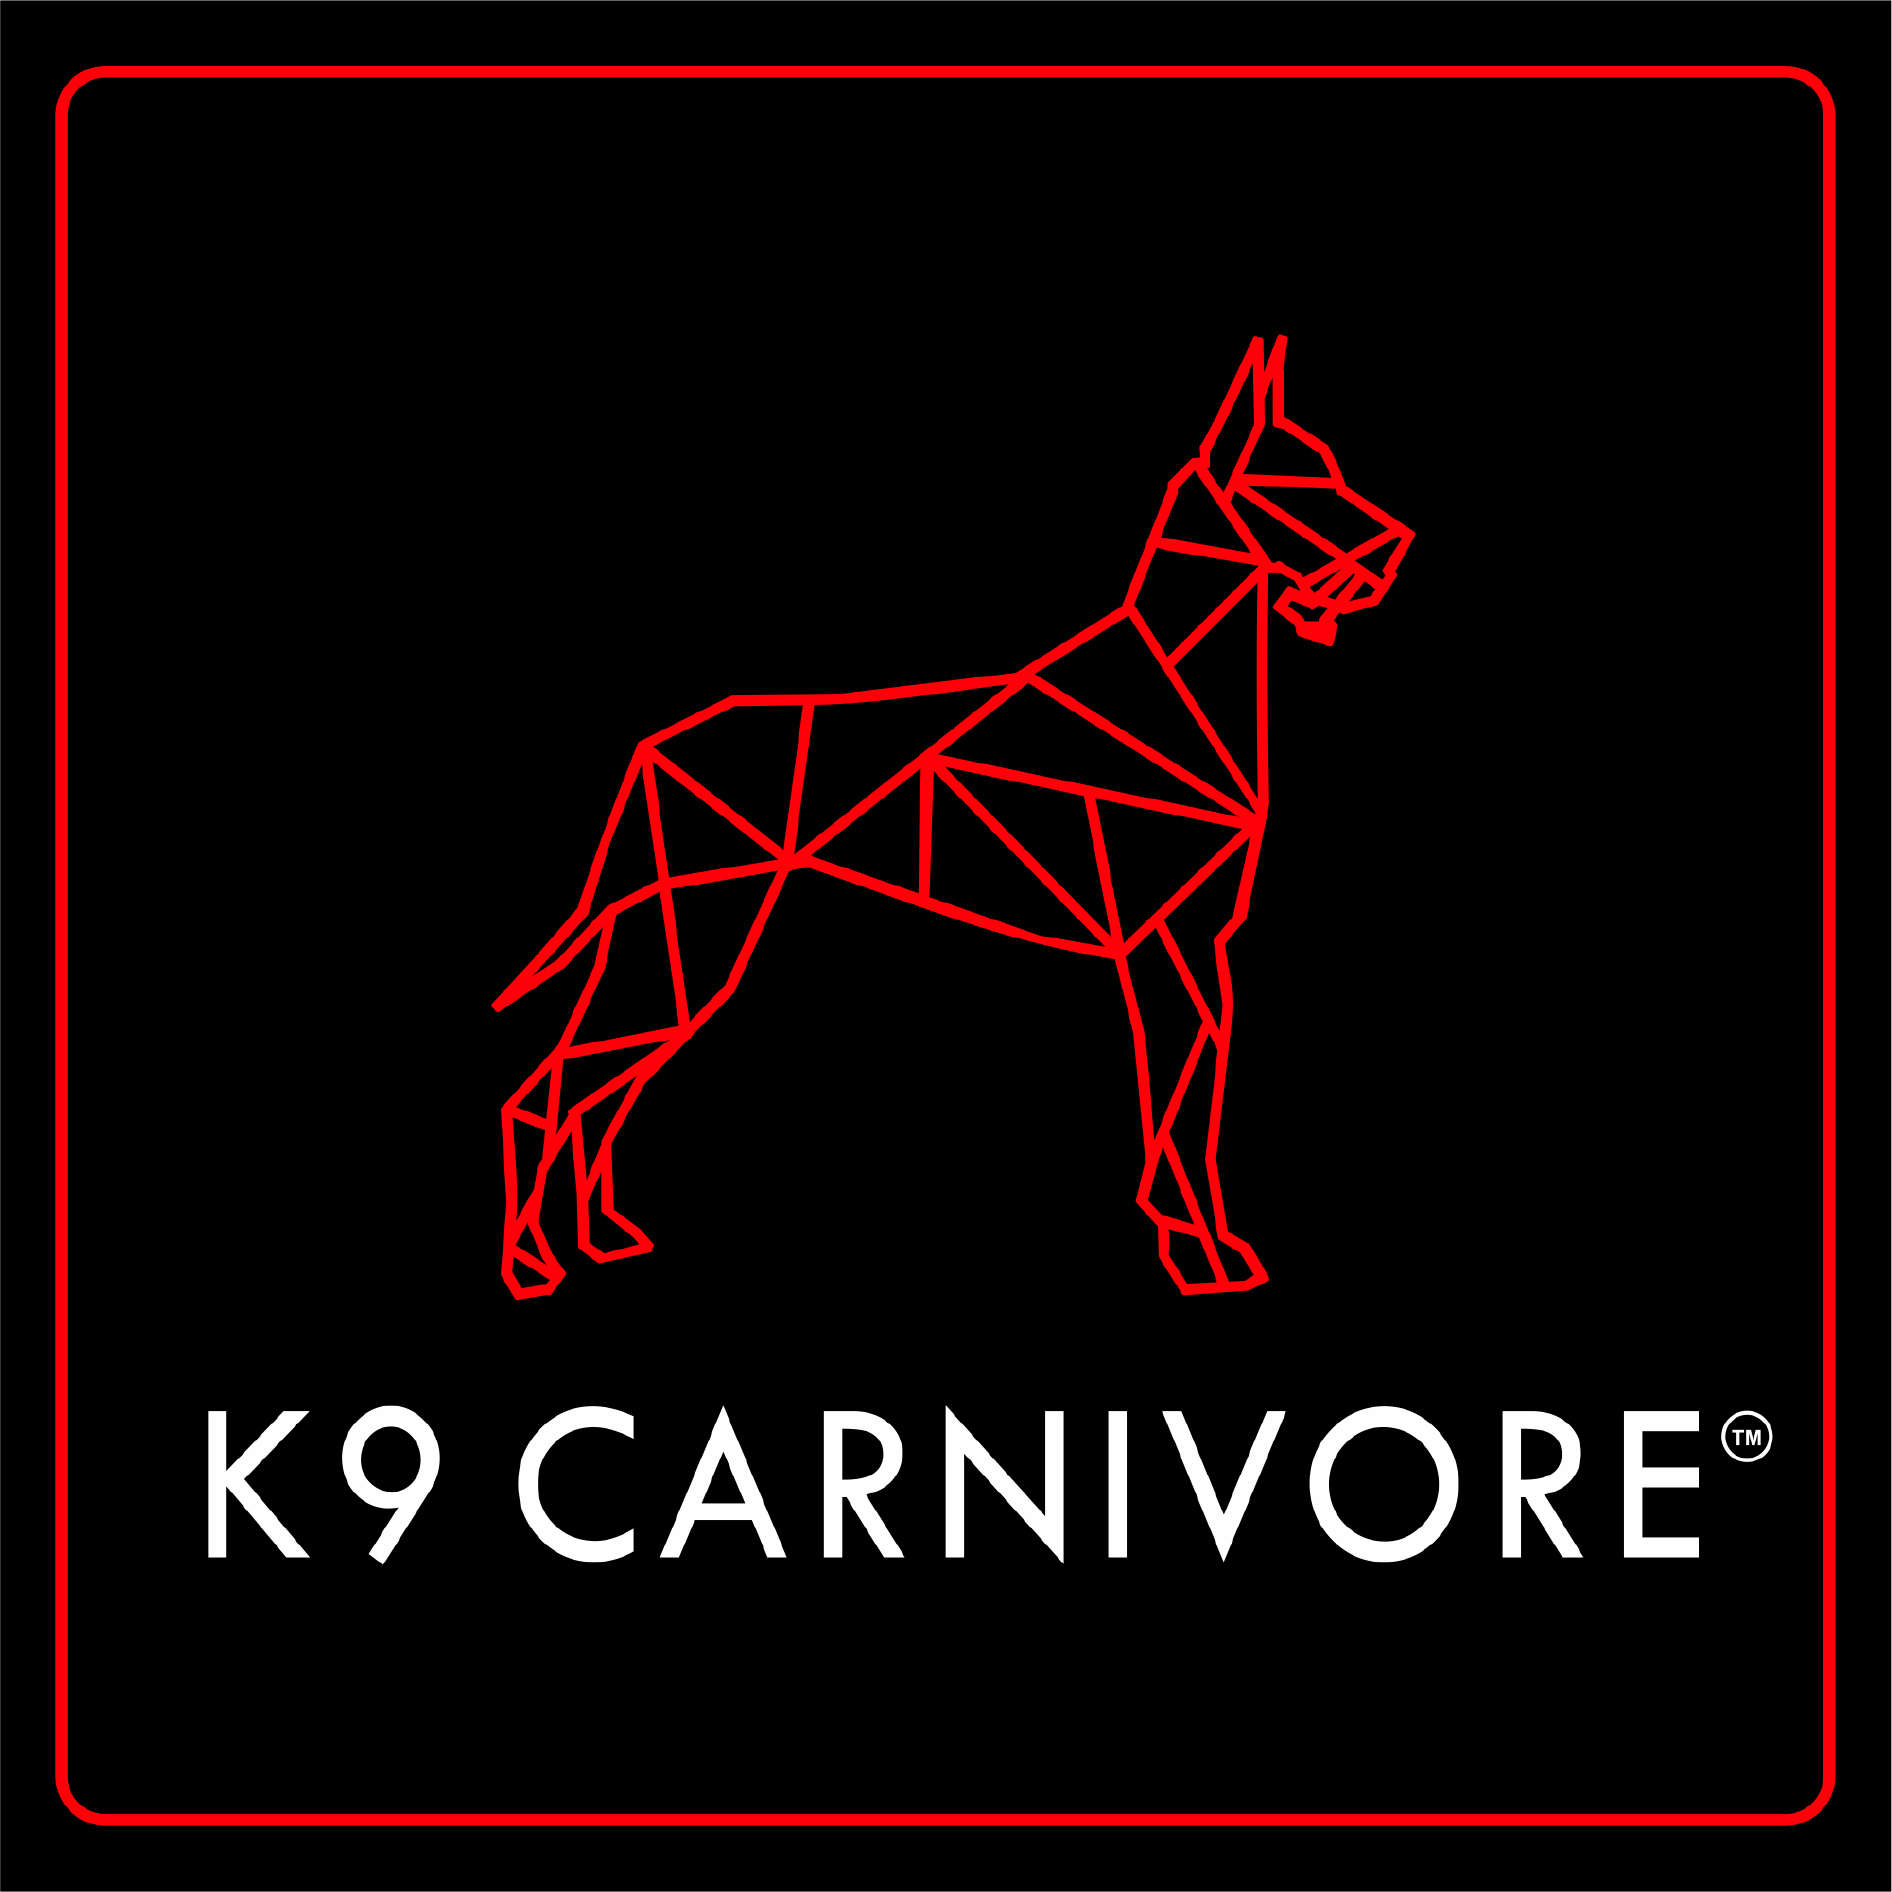 K9 CARNIVORE | What dog products are most popular?